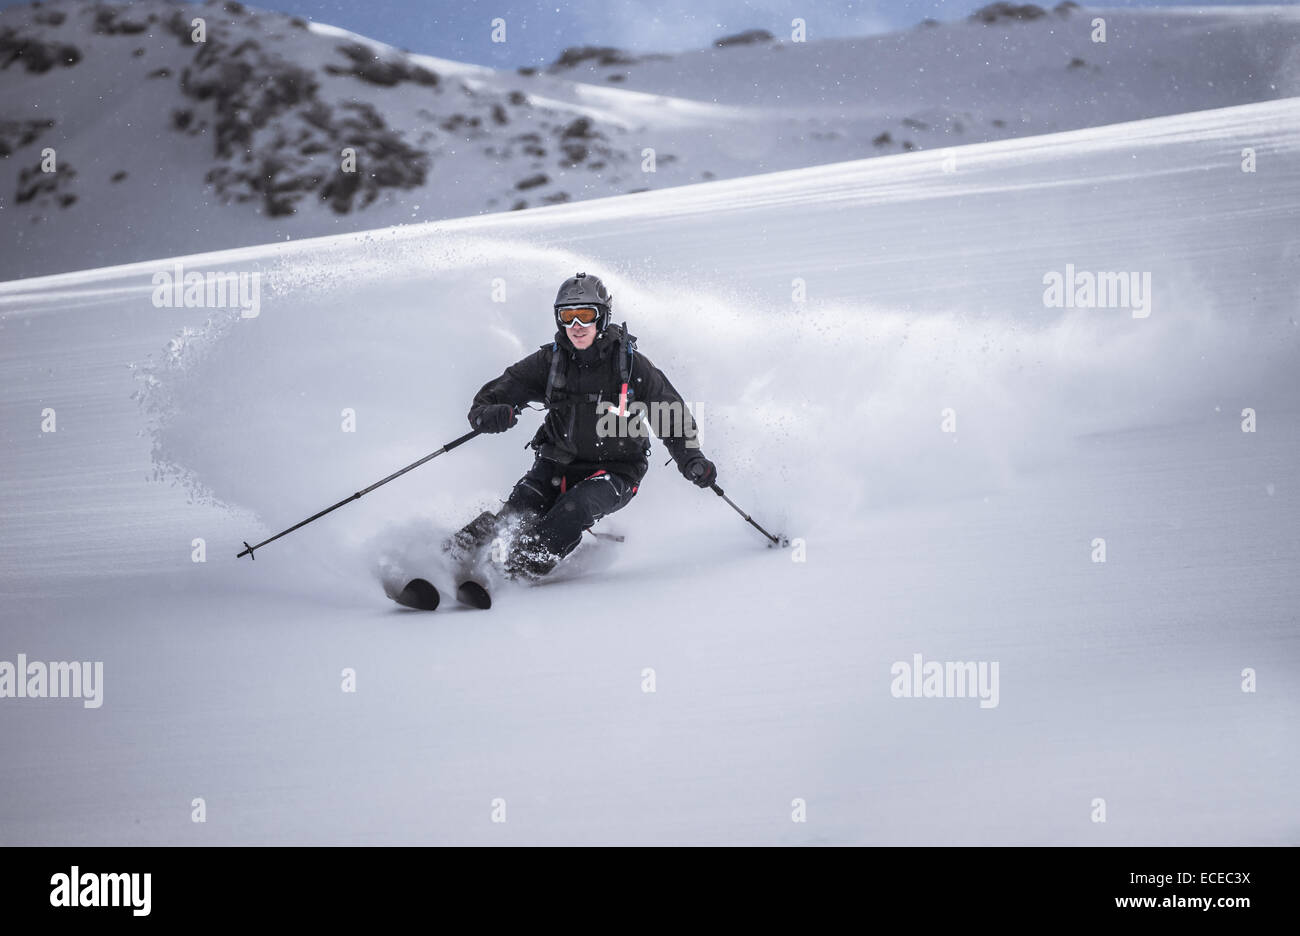 Austria, Front view of free ride skier downhill skiing Stock Photo